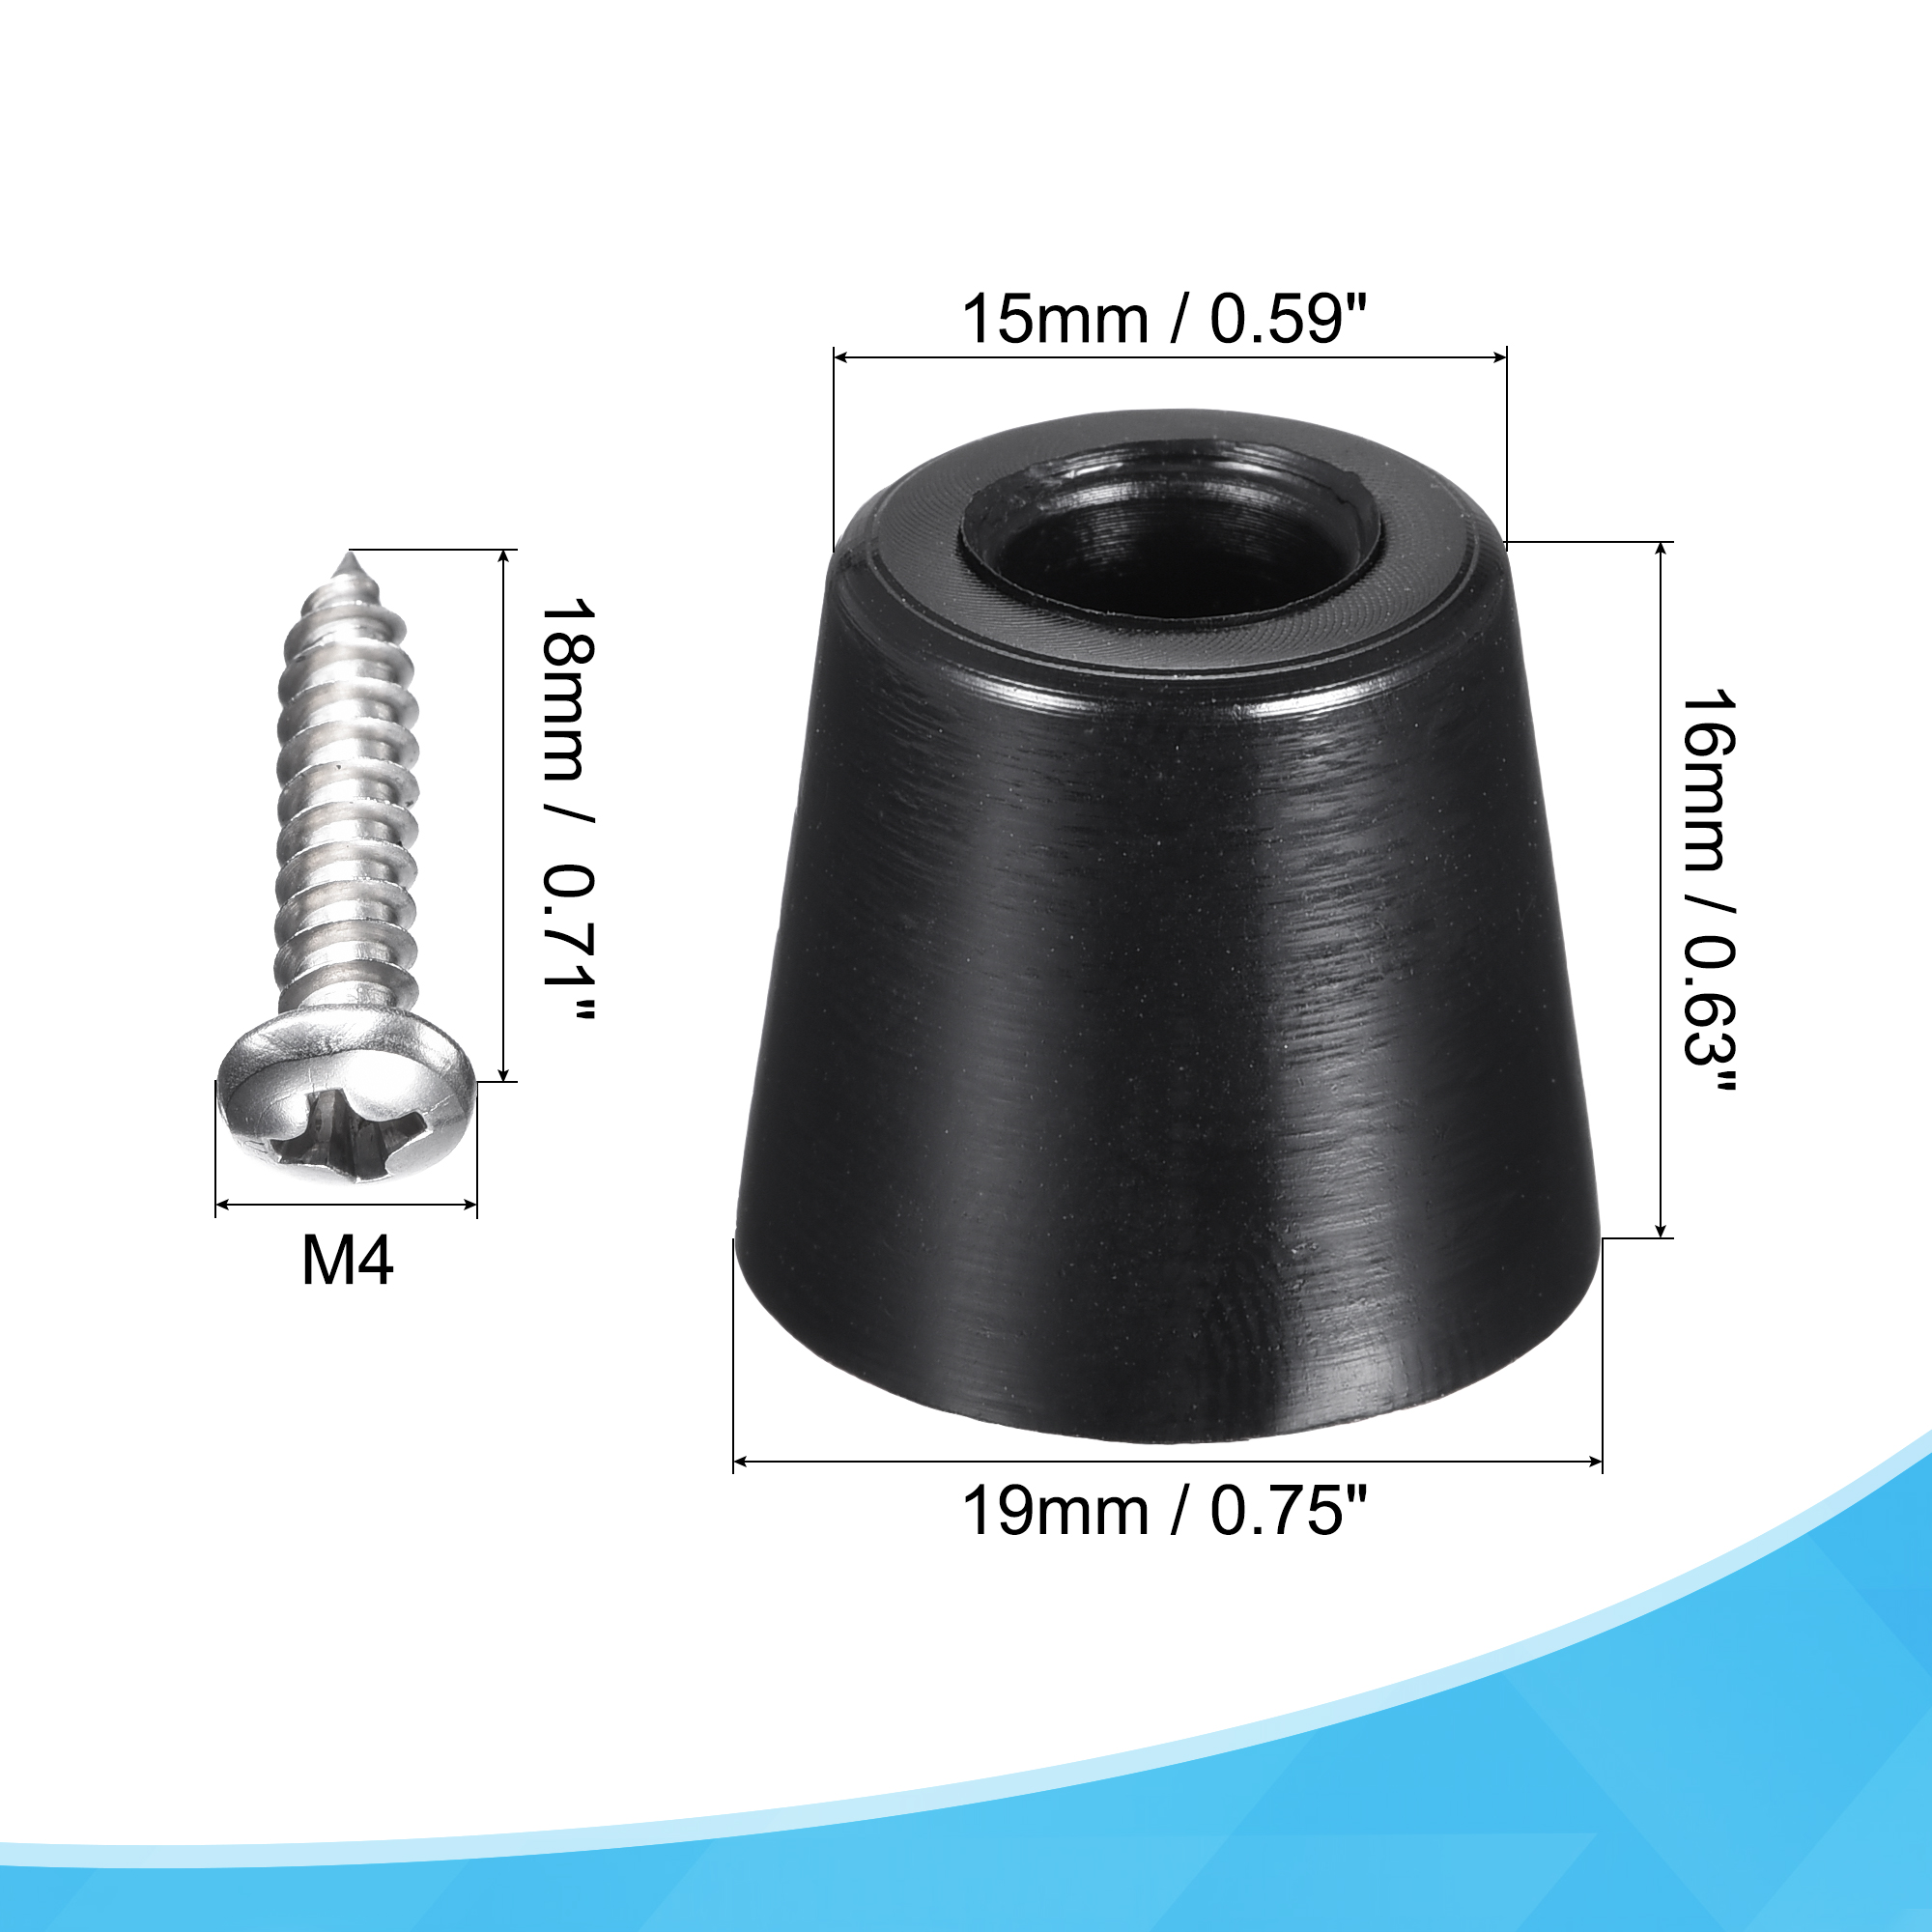 Uxcell 0.75" W x  0.63" H Rubber Bumper Feet, Stainless Steel Screws and Washer 18 Pack - image 3 of 5